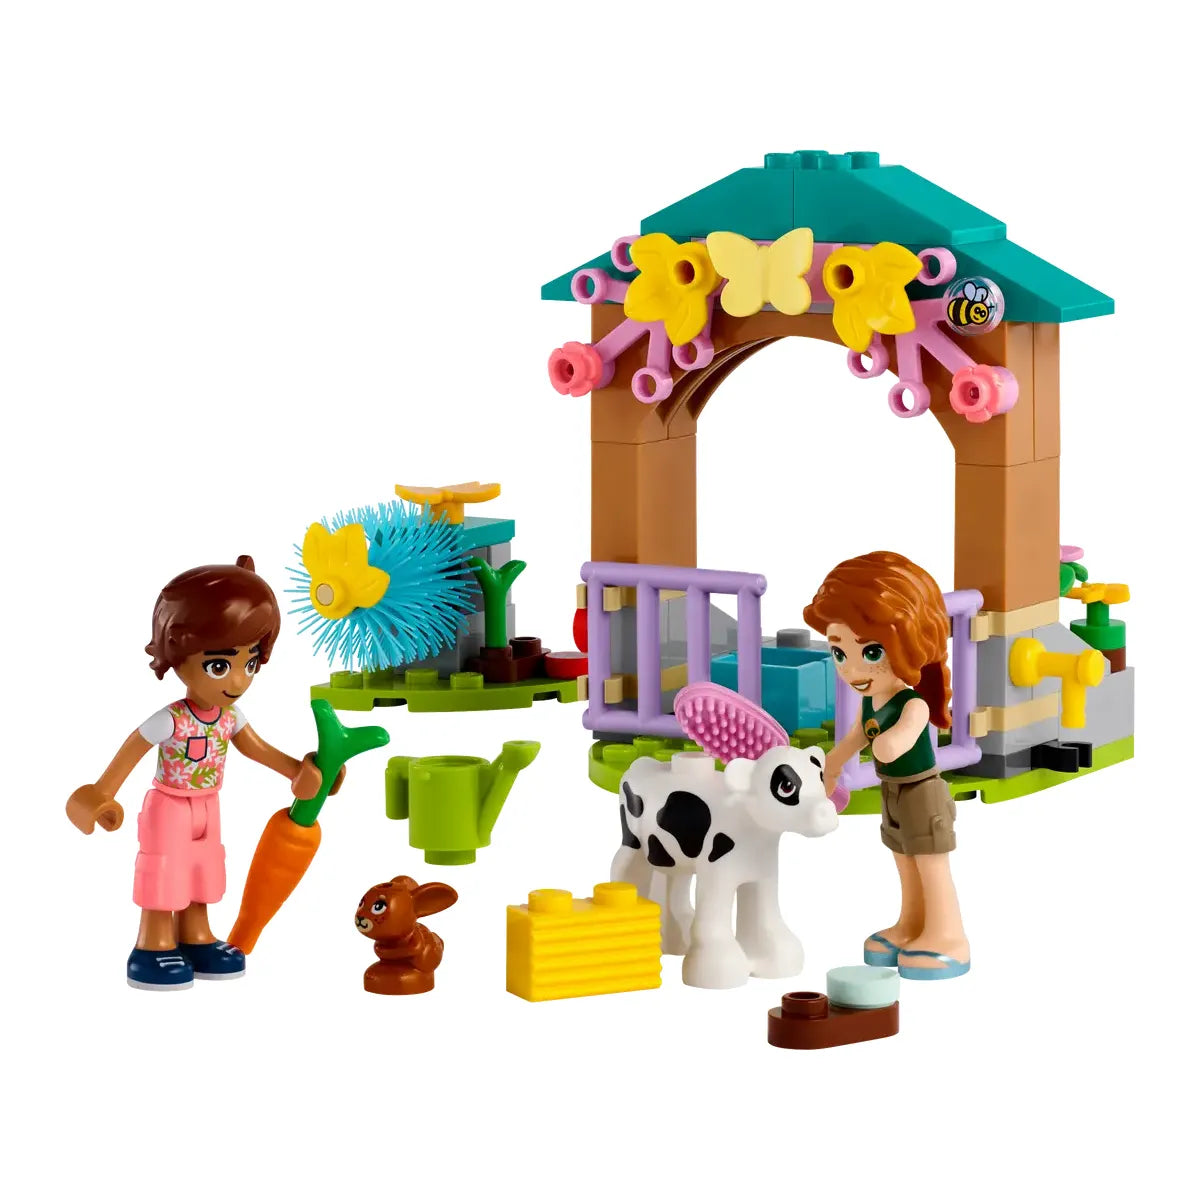 Lego Friends Autumn's Baby Cow Shed